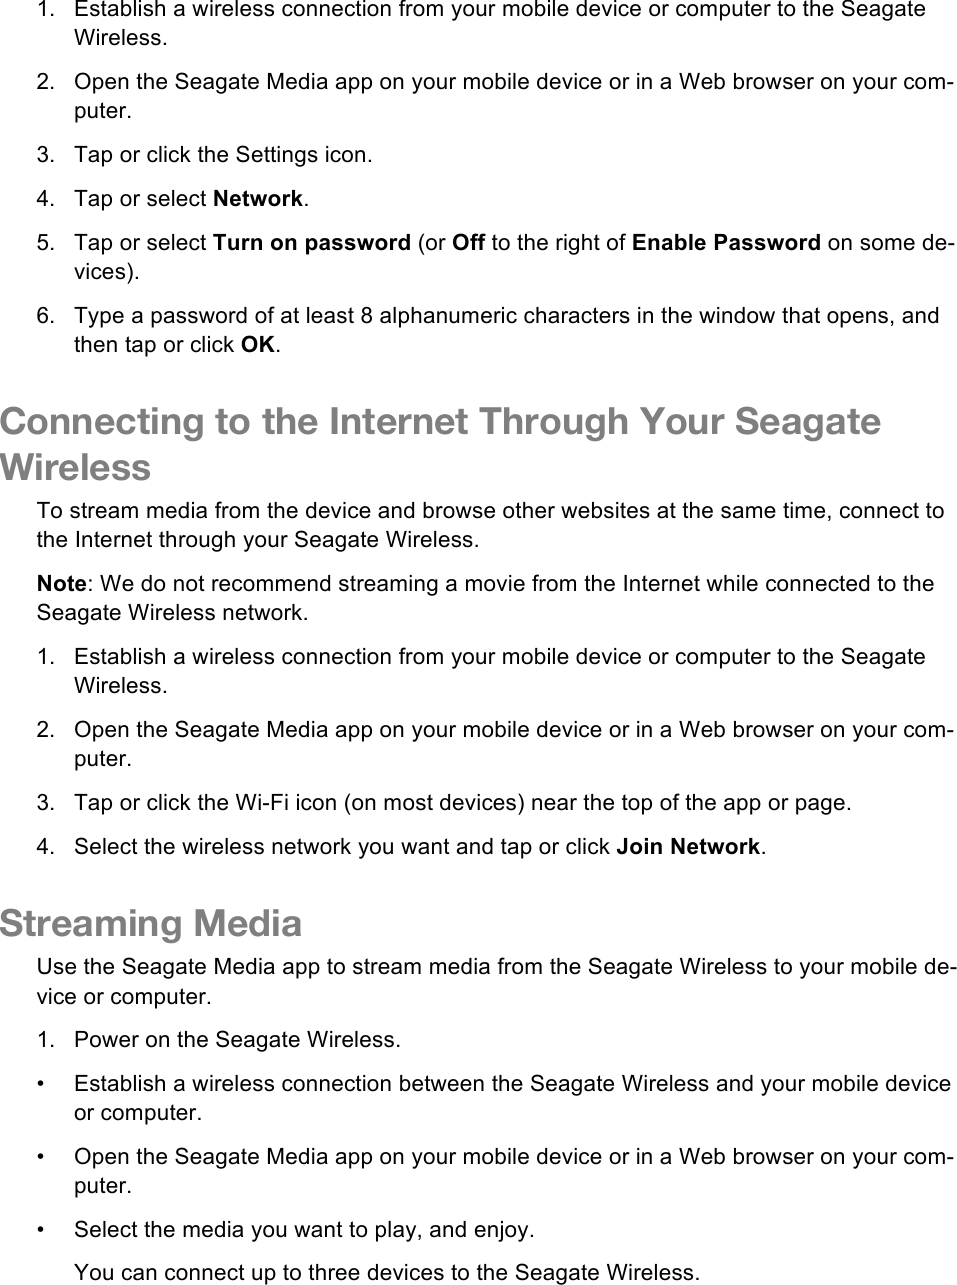 1. Establish a wireless connection from your mobile device or computer to the Seagate Wireless. 2. Open the Seagate Media app on your mobile device or in a Web browser on your com-puter. 3.  Tap or click the Settings icon. 4. Tap or select Network. 5. Tap or select Turn on password (or Off to the right of Enable Password on some de-vices). 6. Type a password of at least 8 alphanumeric characters in the window that opens, and then tap or click OK. Connecting to the Internet Through Your Seagate Wireless To stream media from the device and browse other websites at the same time, connect to the Internet through your Seagate Wireless. Note: We do not recommend streaming a movie from the Internet while connected to the Seagate Wireless network. 1. Establish a wireless connection from your mobile device or computer to the Seagate Wireless. 2. Open the Seagate Media app on your mobile device or in a Web browser on your com-puter. 3. Tap or click the Wi-Fi icon (on most devices) near the top of the app or page. 4. Select the wireless network you want and tap or click Join Network. Streaming Media Use the Seagate Media app to stream media from the Seagate Wireless to your mobile de-vice or computer. 1. Power on the Seagate Wireless. •  Establish a wireless connection between the Seagate Wireless and your mobile device or computer. •  Open the Seagate Media app on your mobile device or in a Web browser on your com-puter. •  Select the media you want to play, and enjoy. You can connect up to three devices to the Seagate Wireless. 